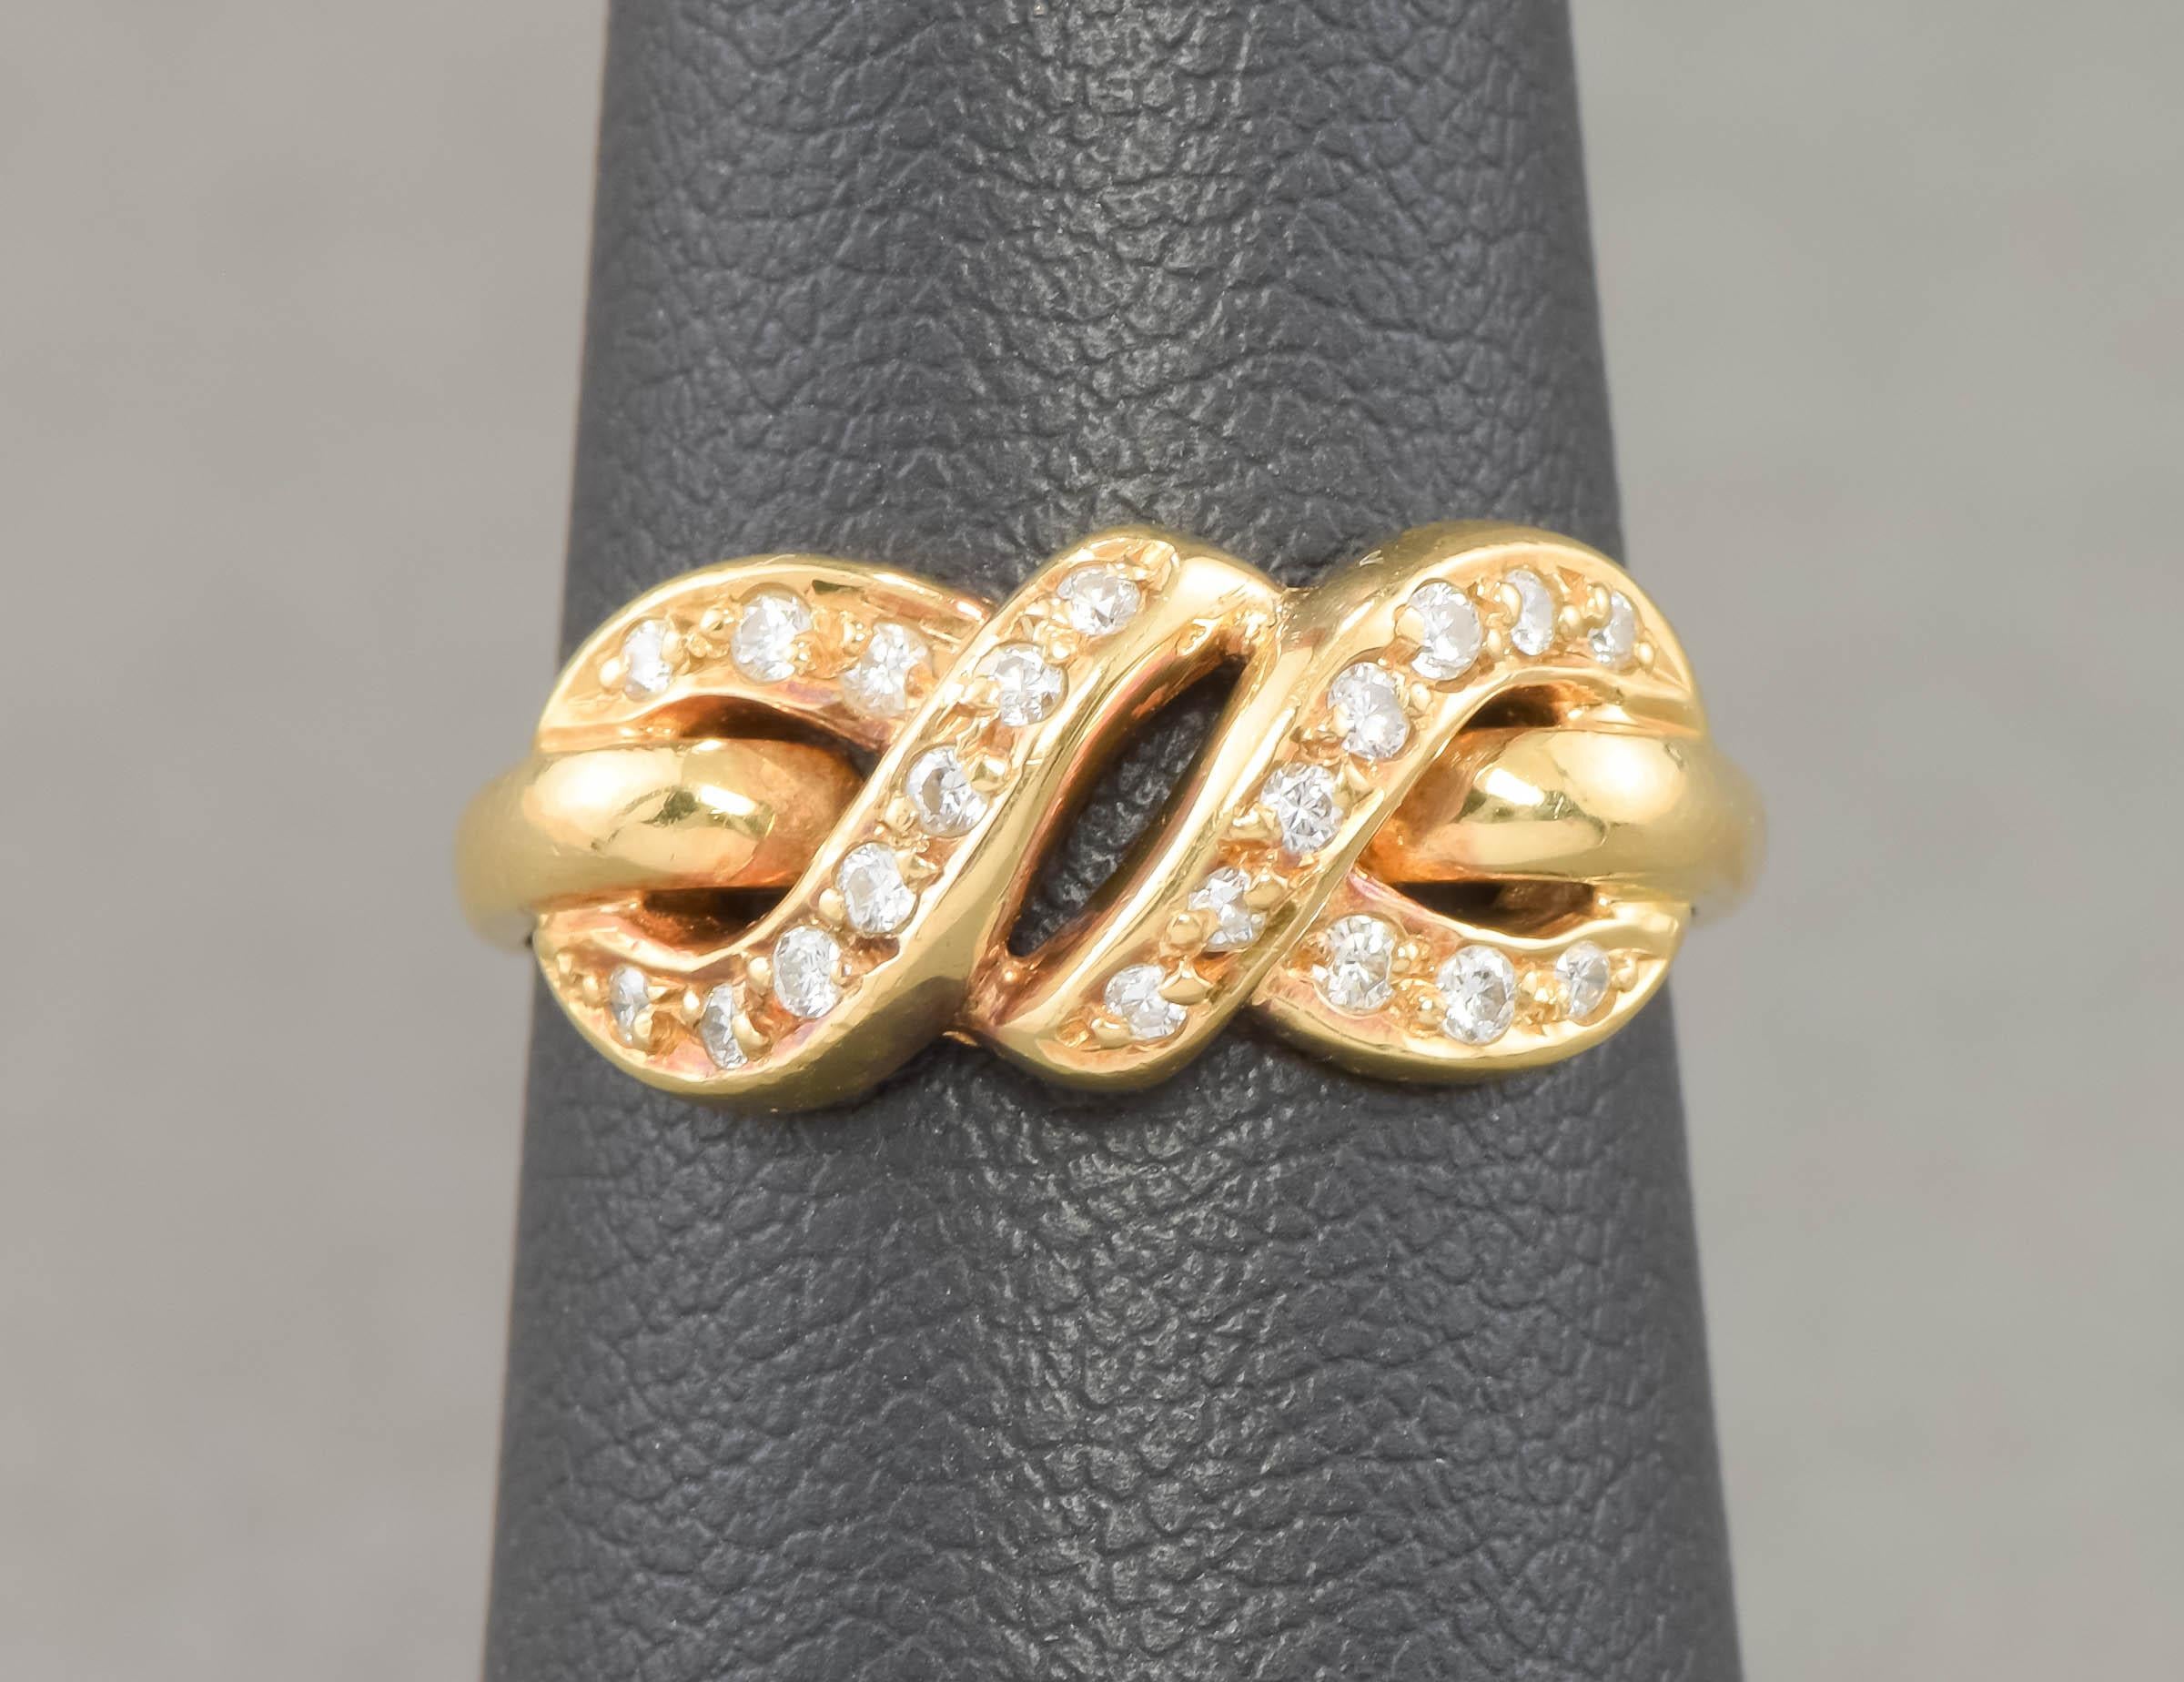 I’m pleased to offer a wonderful, classic & elegant diamond eternity love knot ring from the 1980's.

Crafted of solid 18K yellow gold, the ring features an eternity knot design, sparkling with 20 very clean and fiery modern round brilliant cut